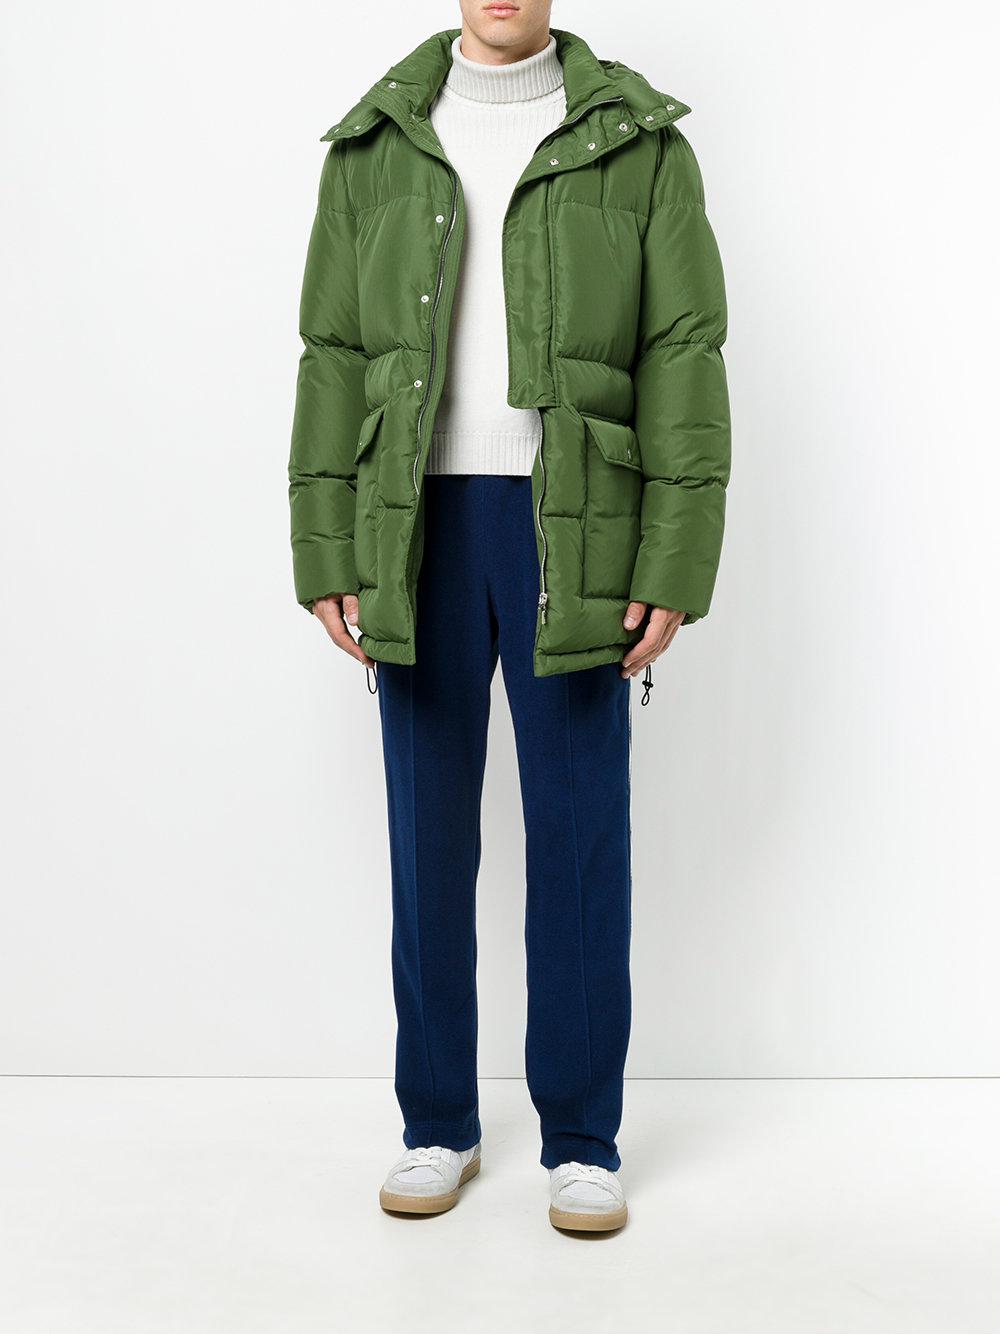 Lyst - Msgm Puffer Jacket in Green for Men